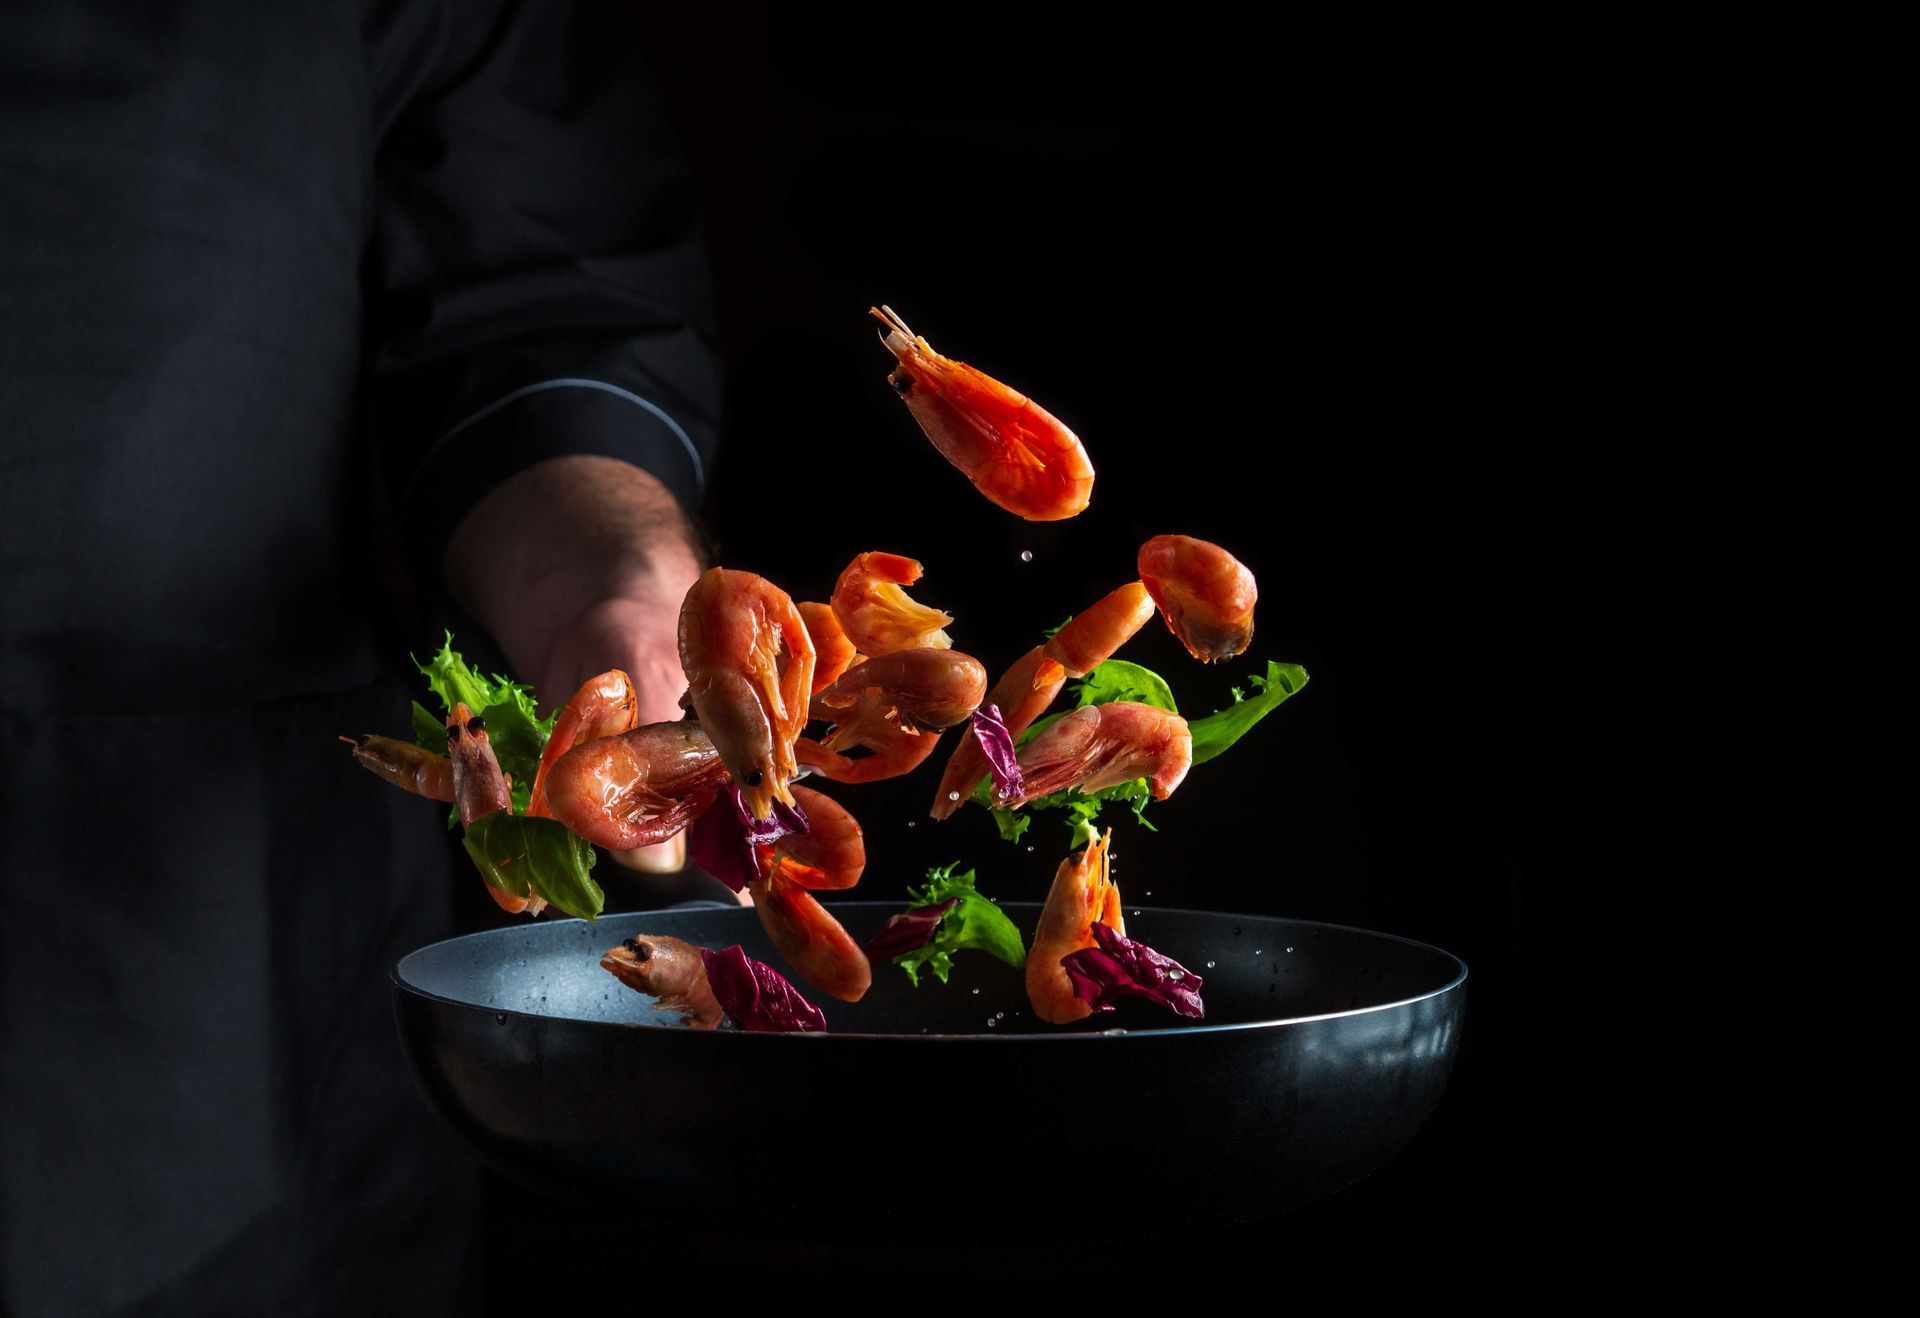 A professional photograph of a man making a shrimp stir fry meal in a pan to promote his Texas business